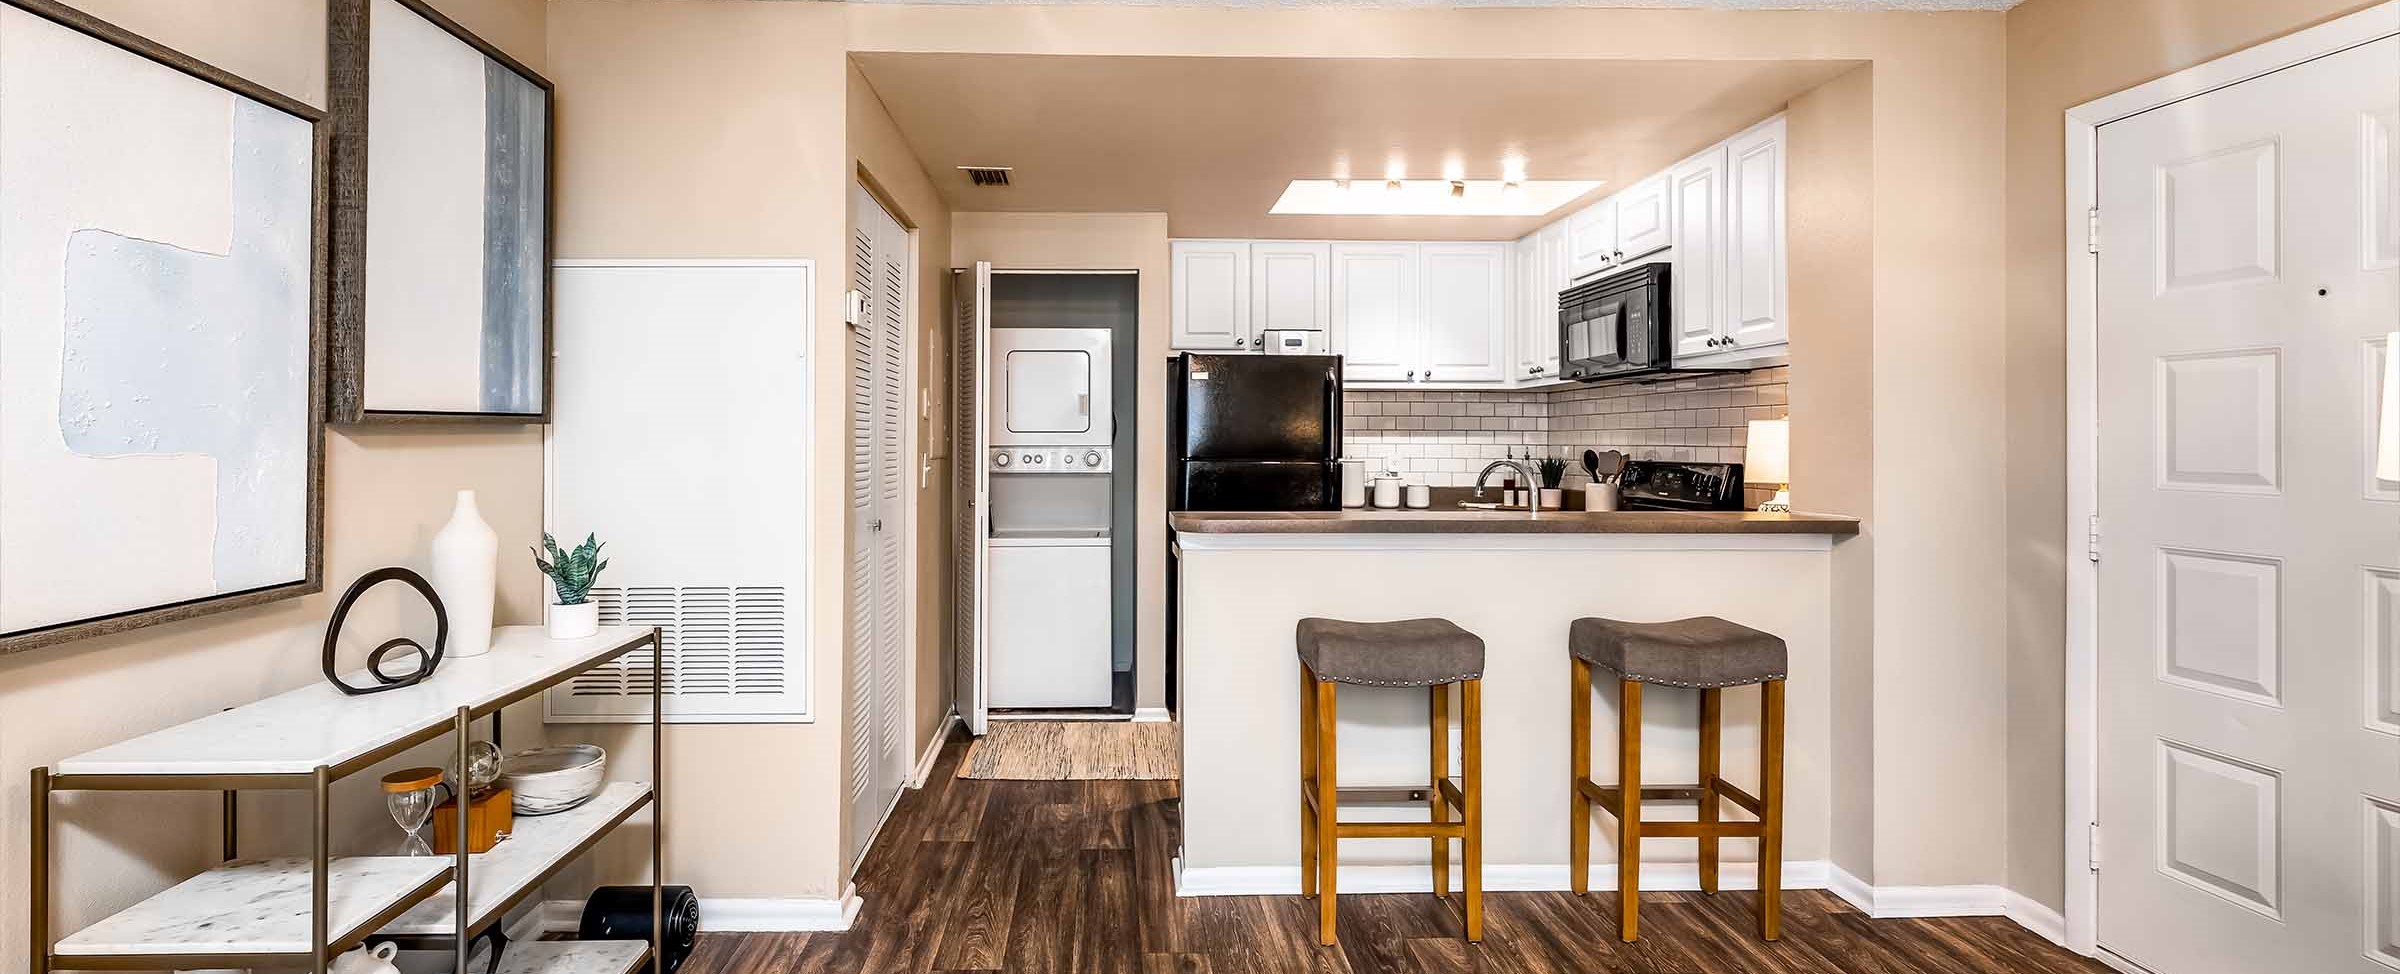 kitchen, laundry and living room at The Meridian Apartments